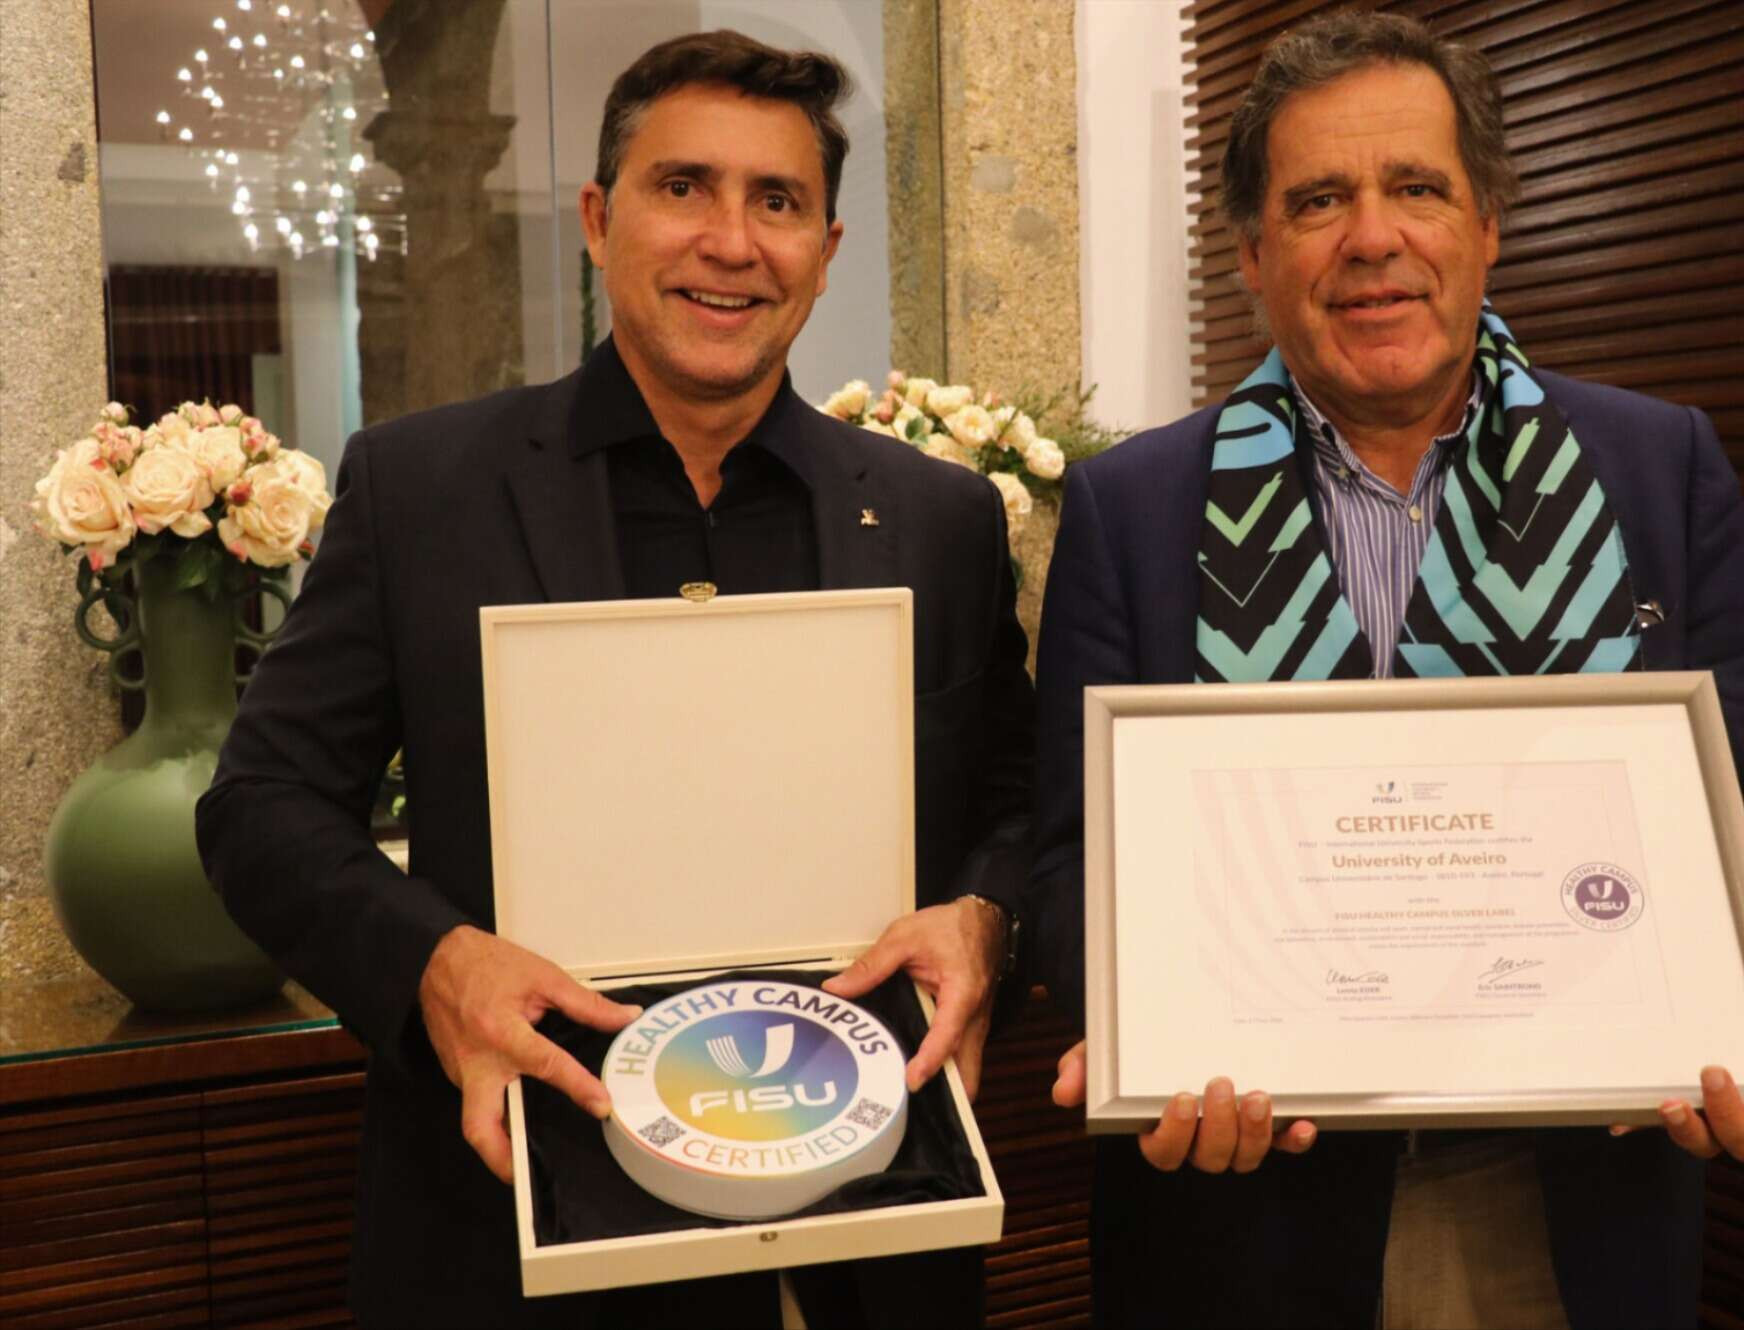 FISU's acting first vice-president Luciano Cabral, left, presented University of Aveiro vice-rector Manuel Matias with the certificate ©FISU